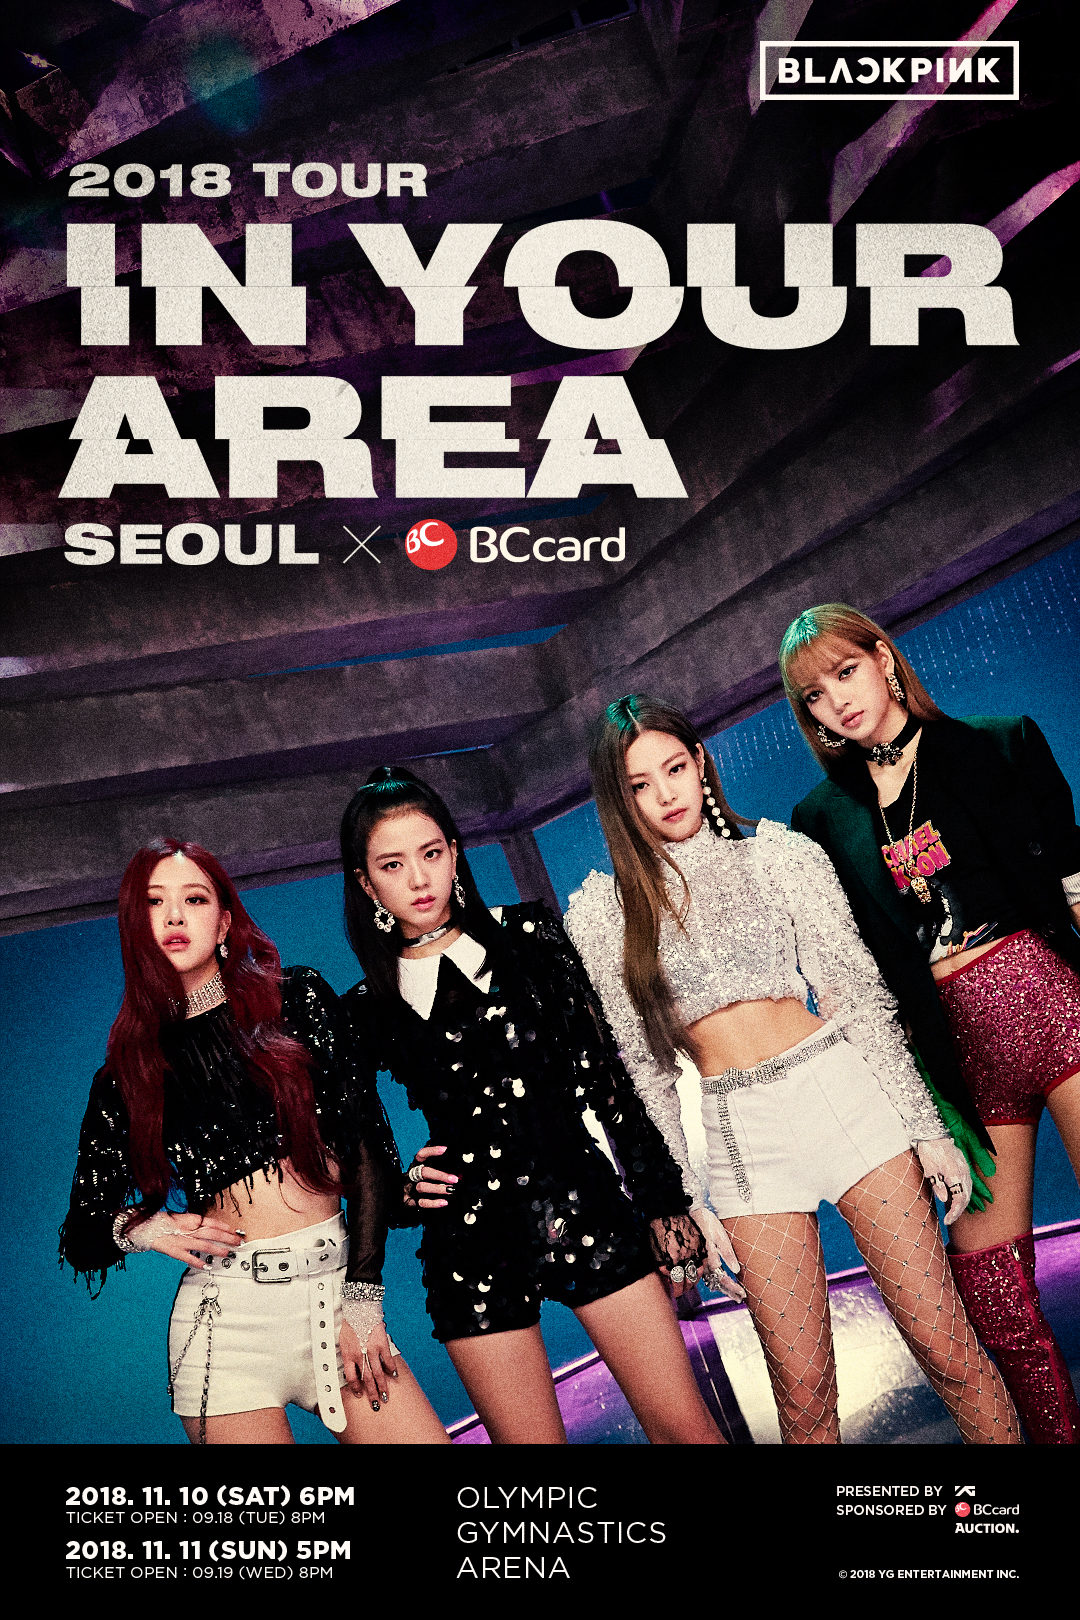 BLACKPINK 2018 Tour (In Your Area) Seoul x BC Card | BLACK PINK Wiki |  Fandom